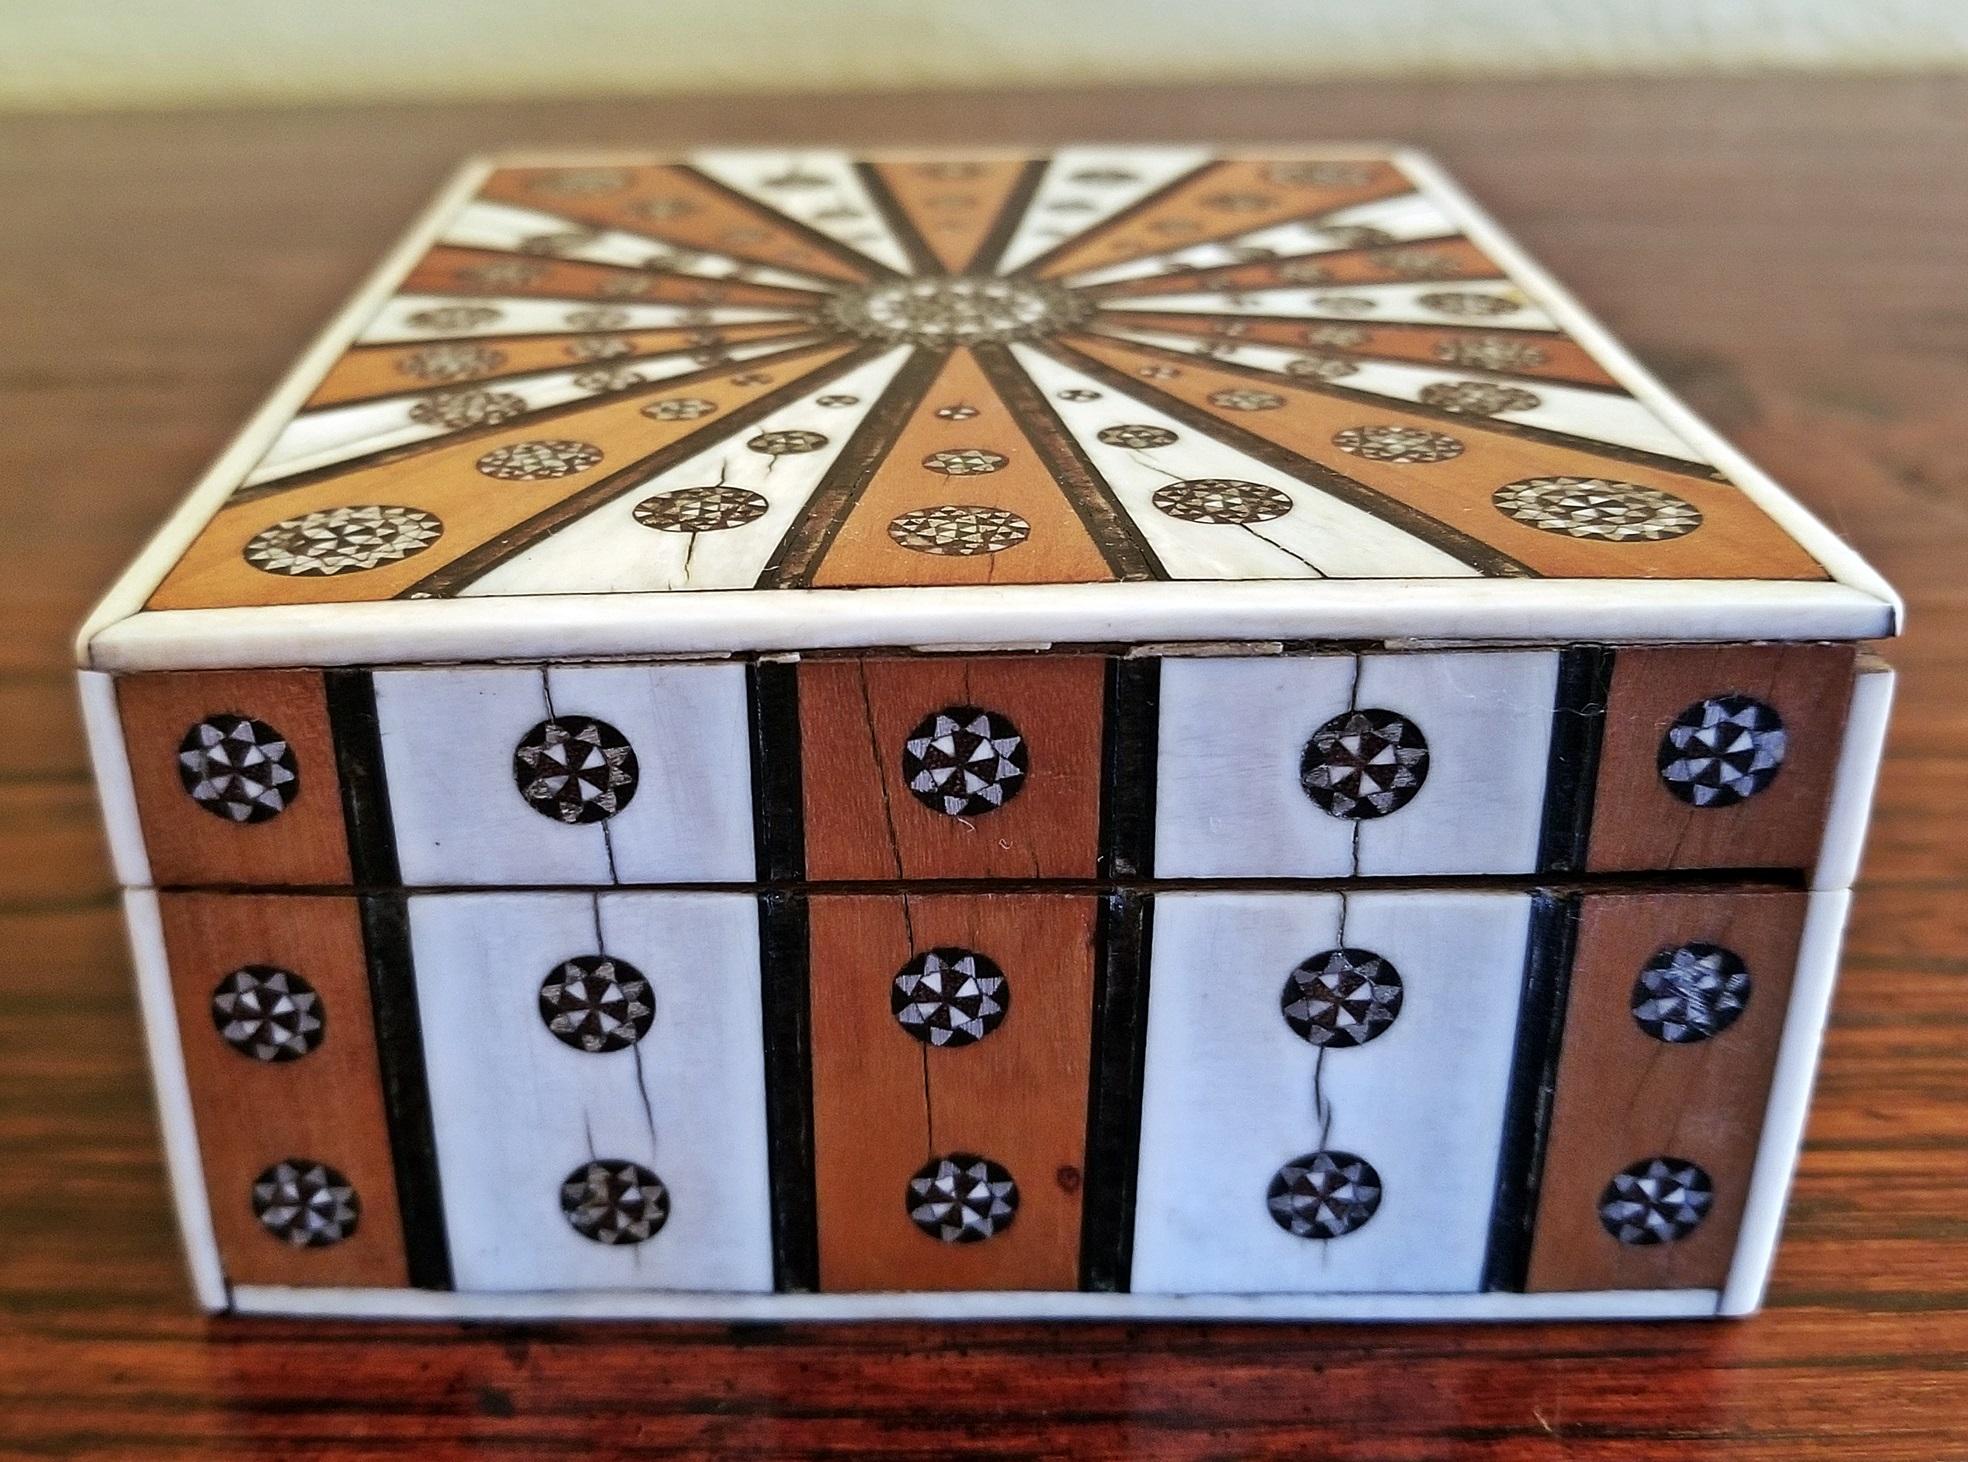 Gorgeous Anglo-Indian rectangular shaped trinket box in sunburst pattern.
Made in Vizagapatam, India in the 19th century, circa 1865.

The box is constructed of sandalwood the covered in bone/faux ivory and rosewood in alternating sections in a